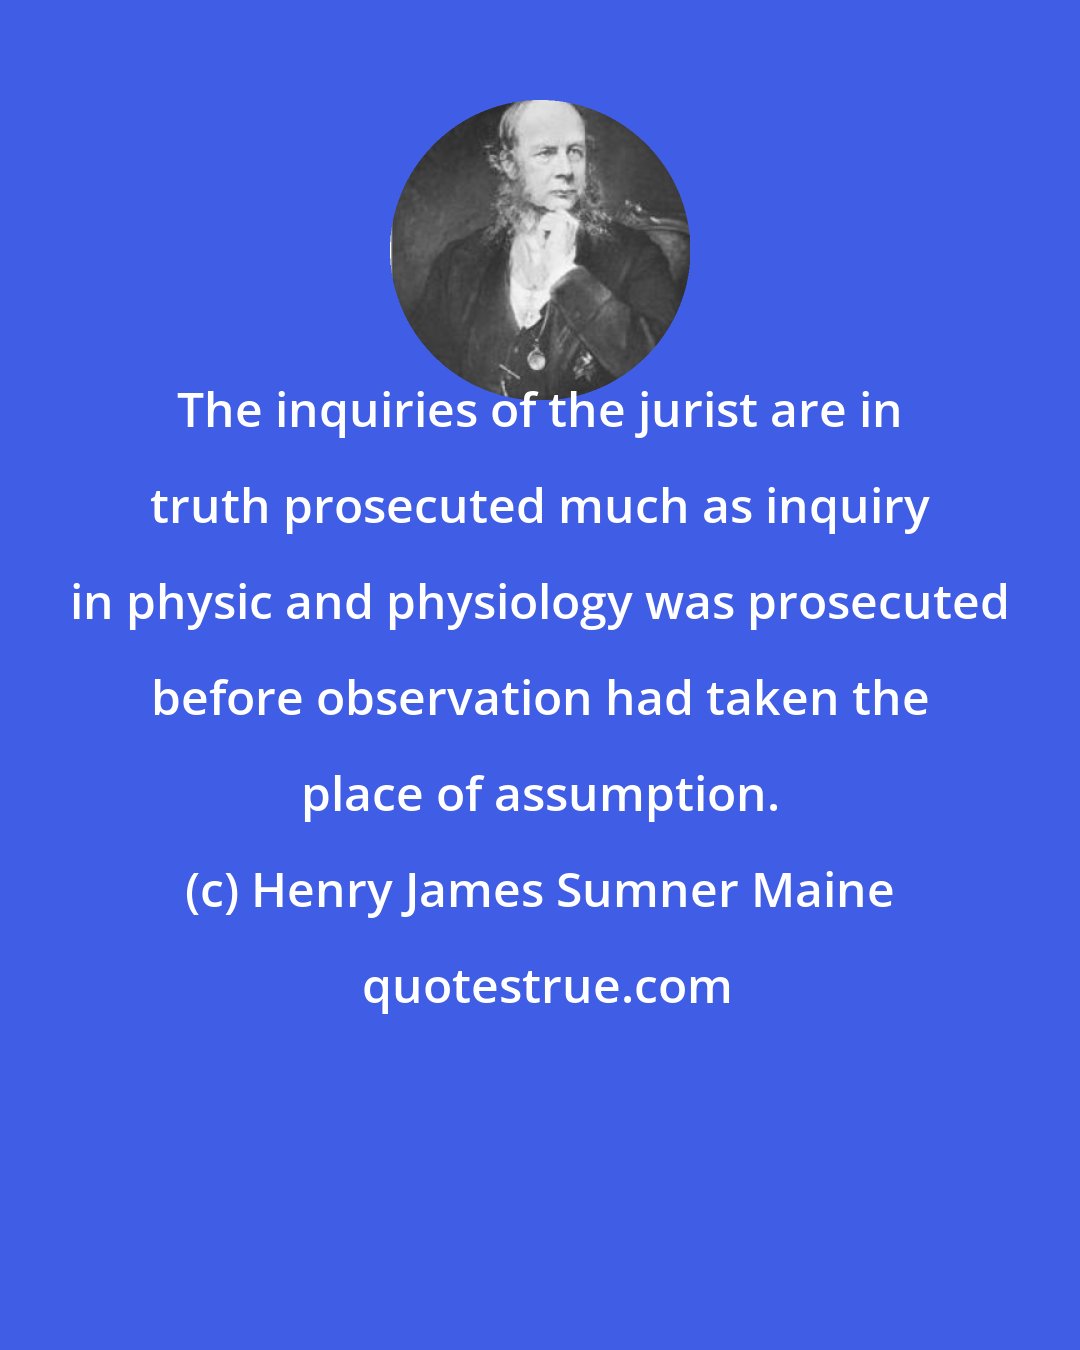 Henry James Sumner Maine: The inquiries of the jurist are in truth prosecuted much as inquiry in physic and physiology was prosecuted before observation had taken the place of assumption.